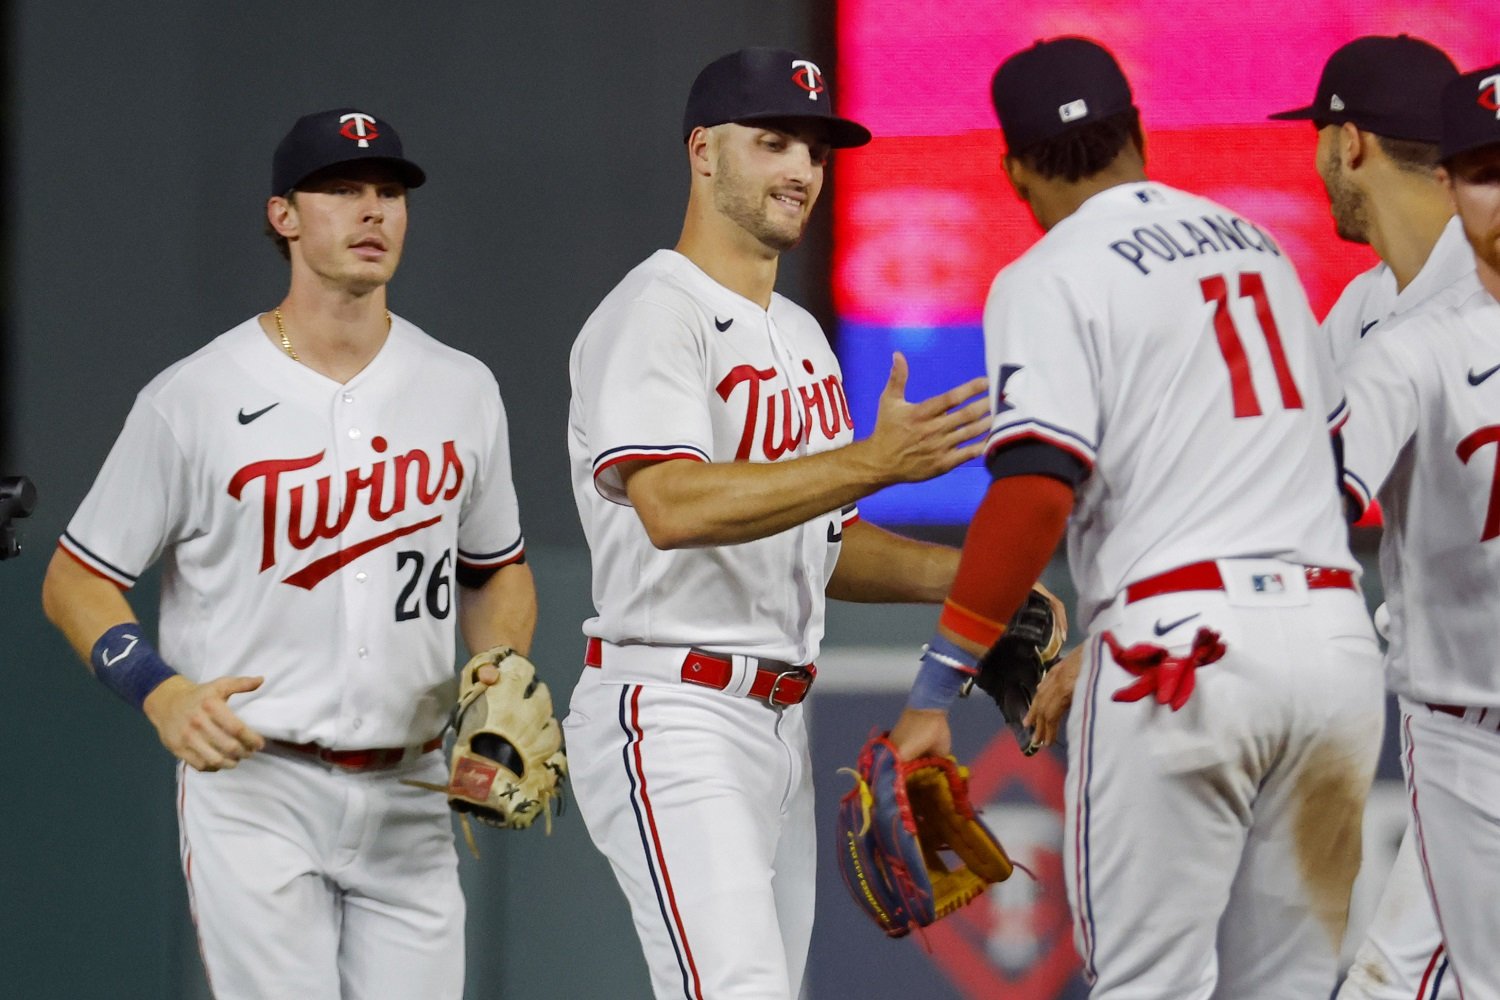 Trade Deadline Preview: The Toronto Blue Jays - Twins - Twins Daily